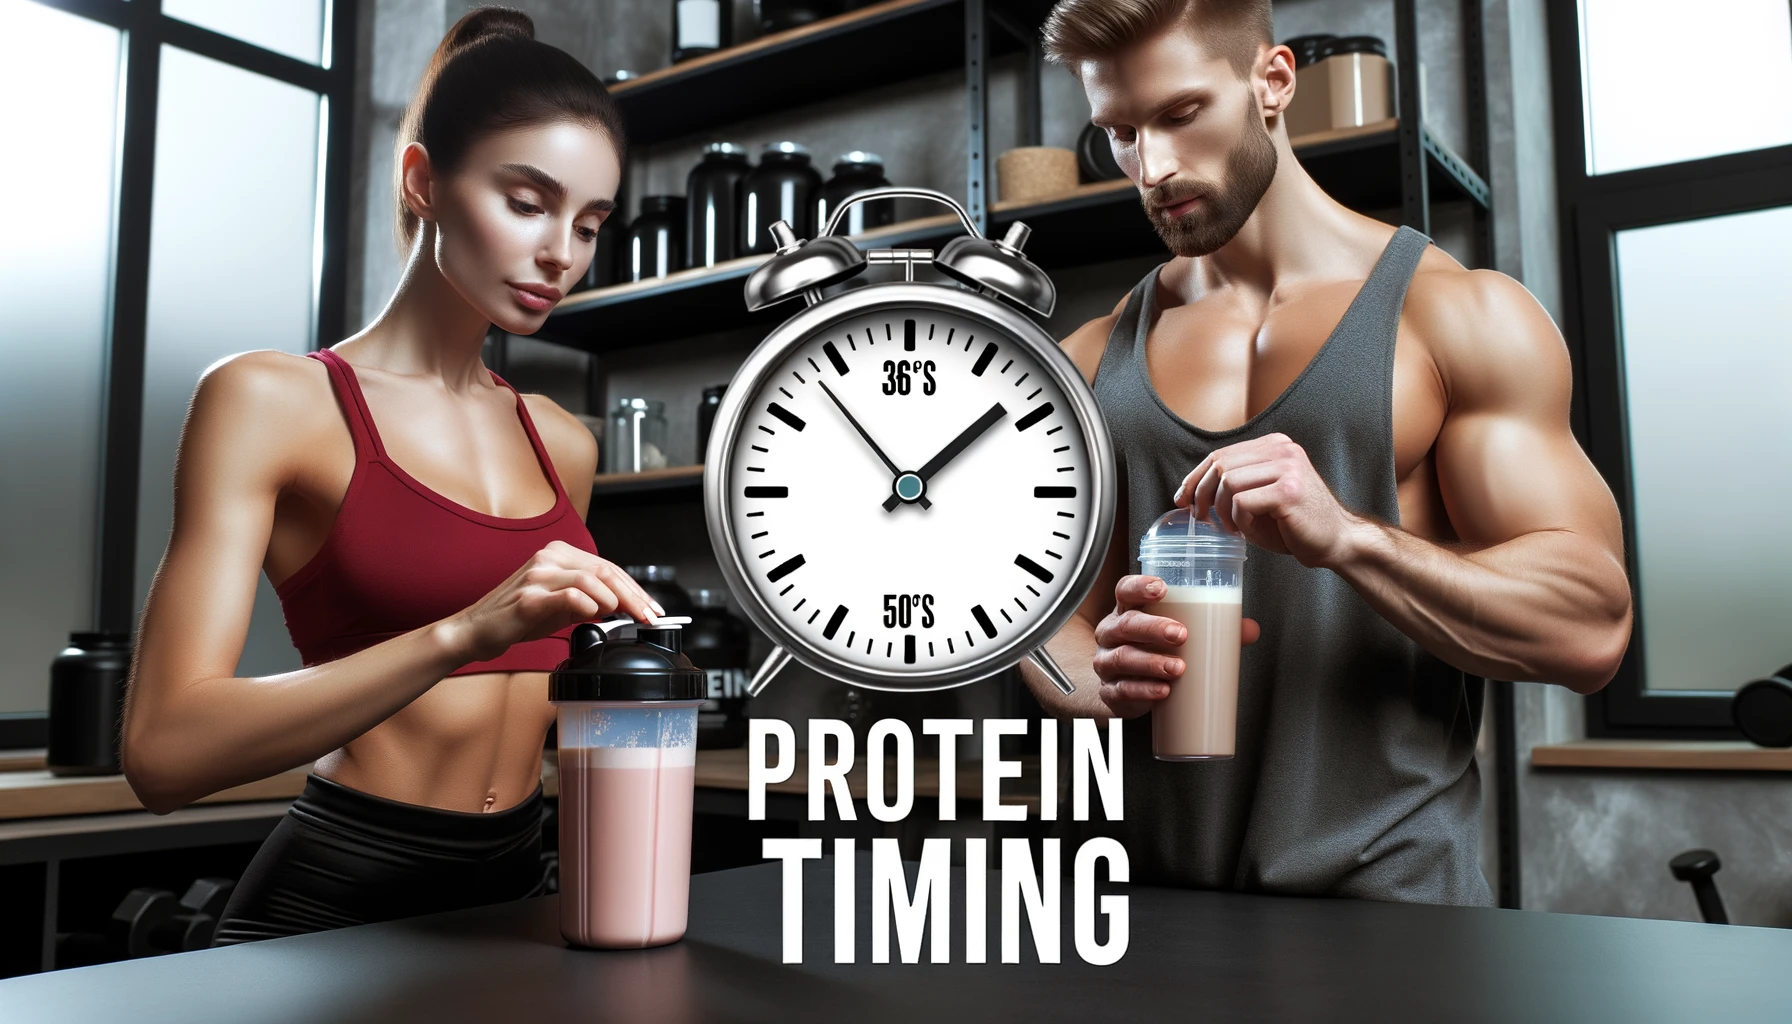 How Does the Timing of Protein Powder Intake Affect Muscle Protein Synthesis Post-Workout?